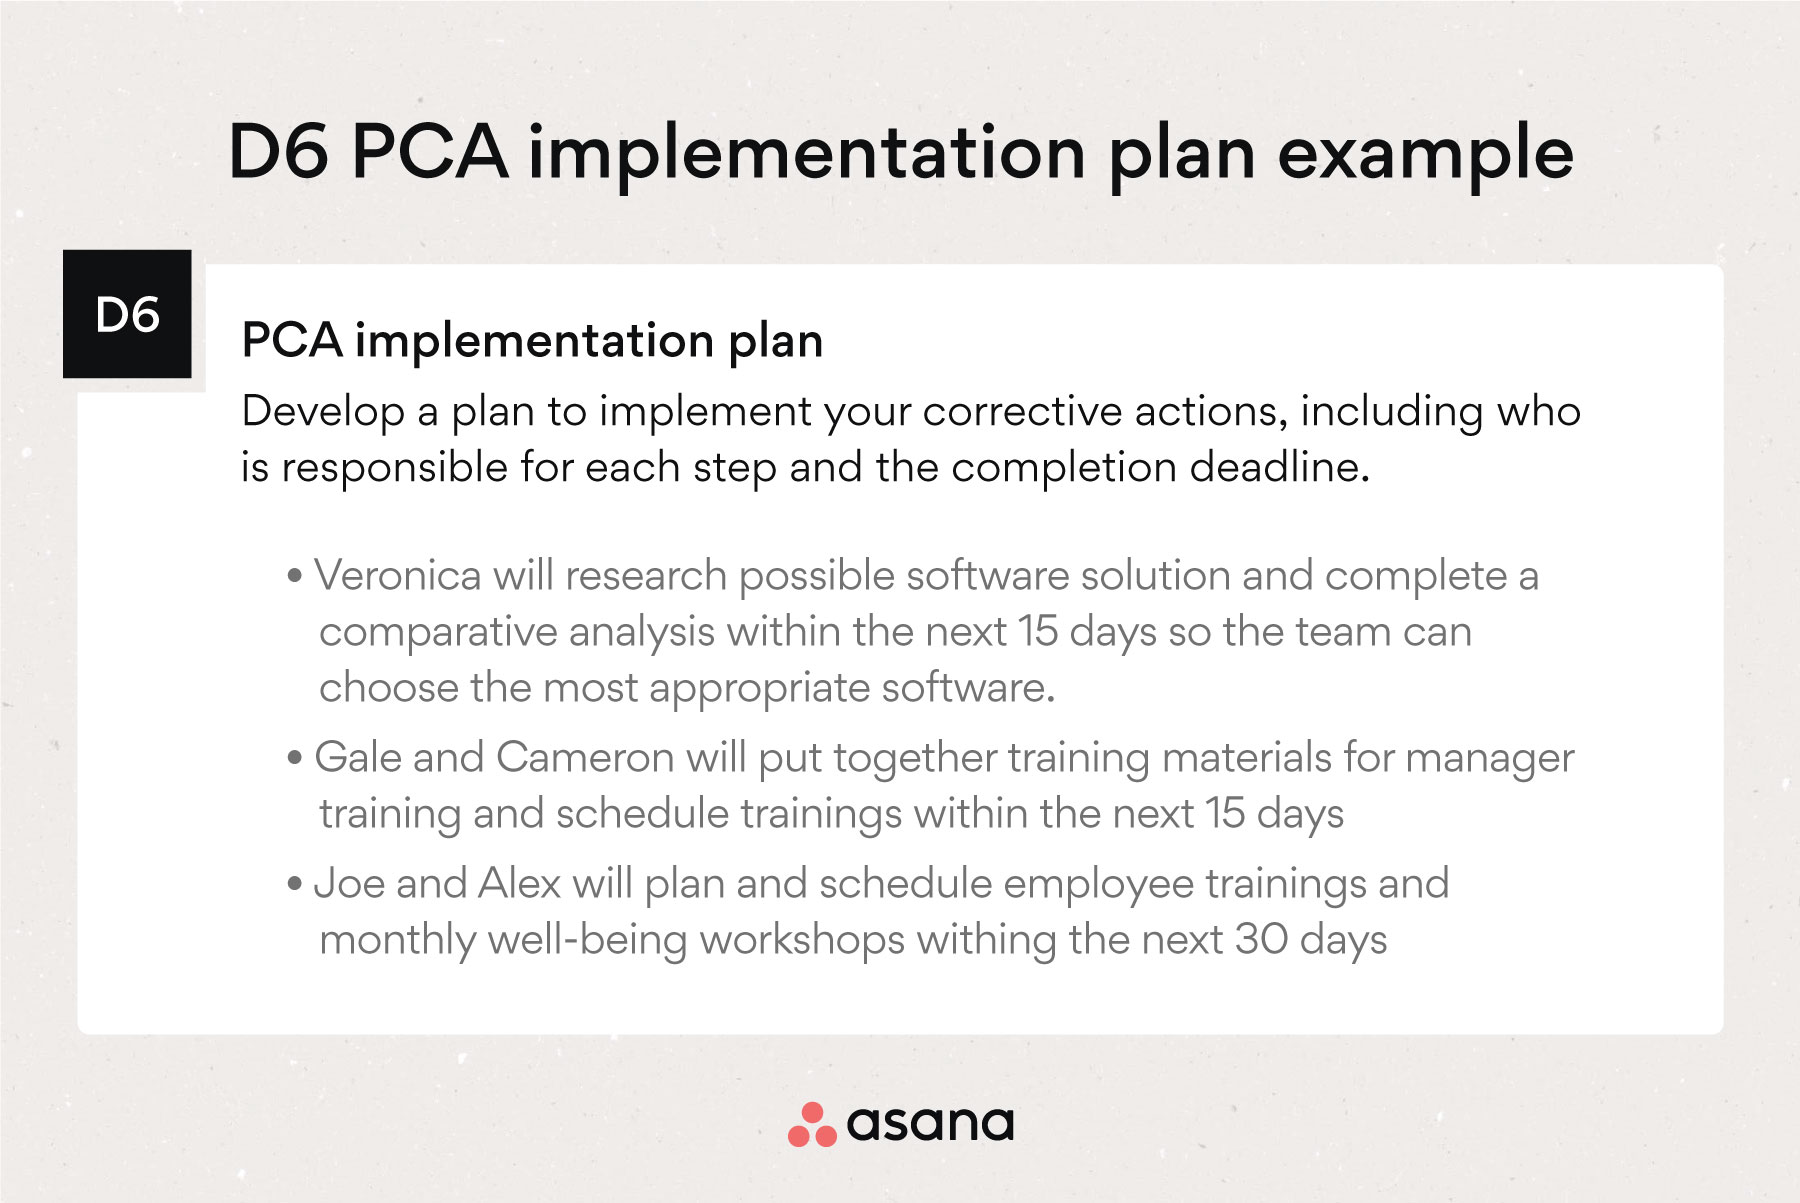 D6 PCA implementation plan example